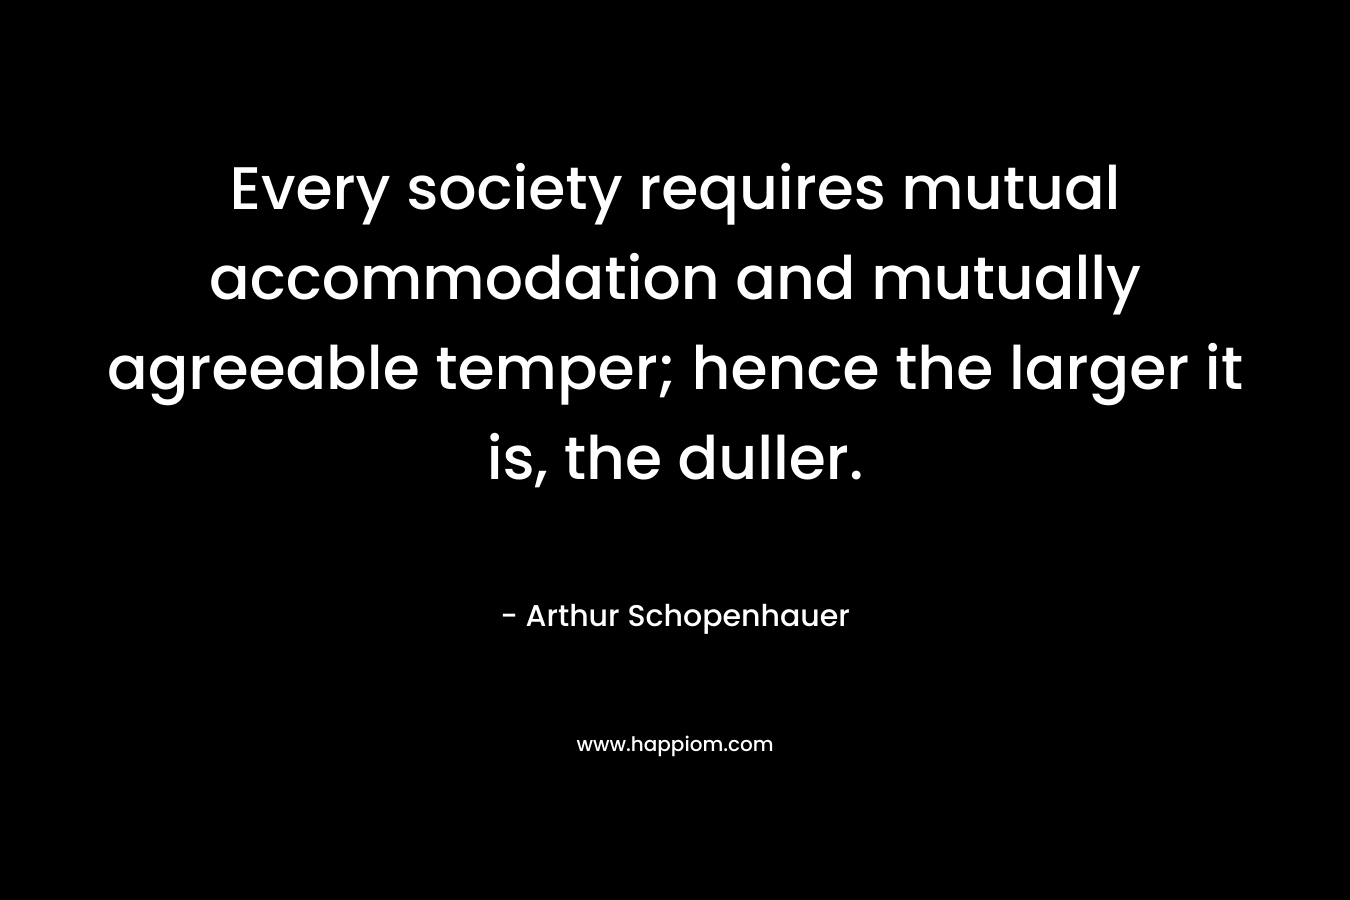 Every society requires mutual accommodation and mutually agreeable temper; hence the larger it is, the duller.